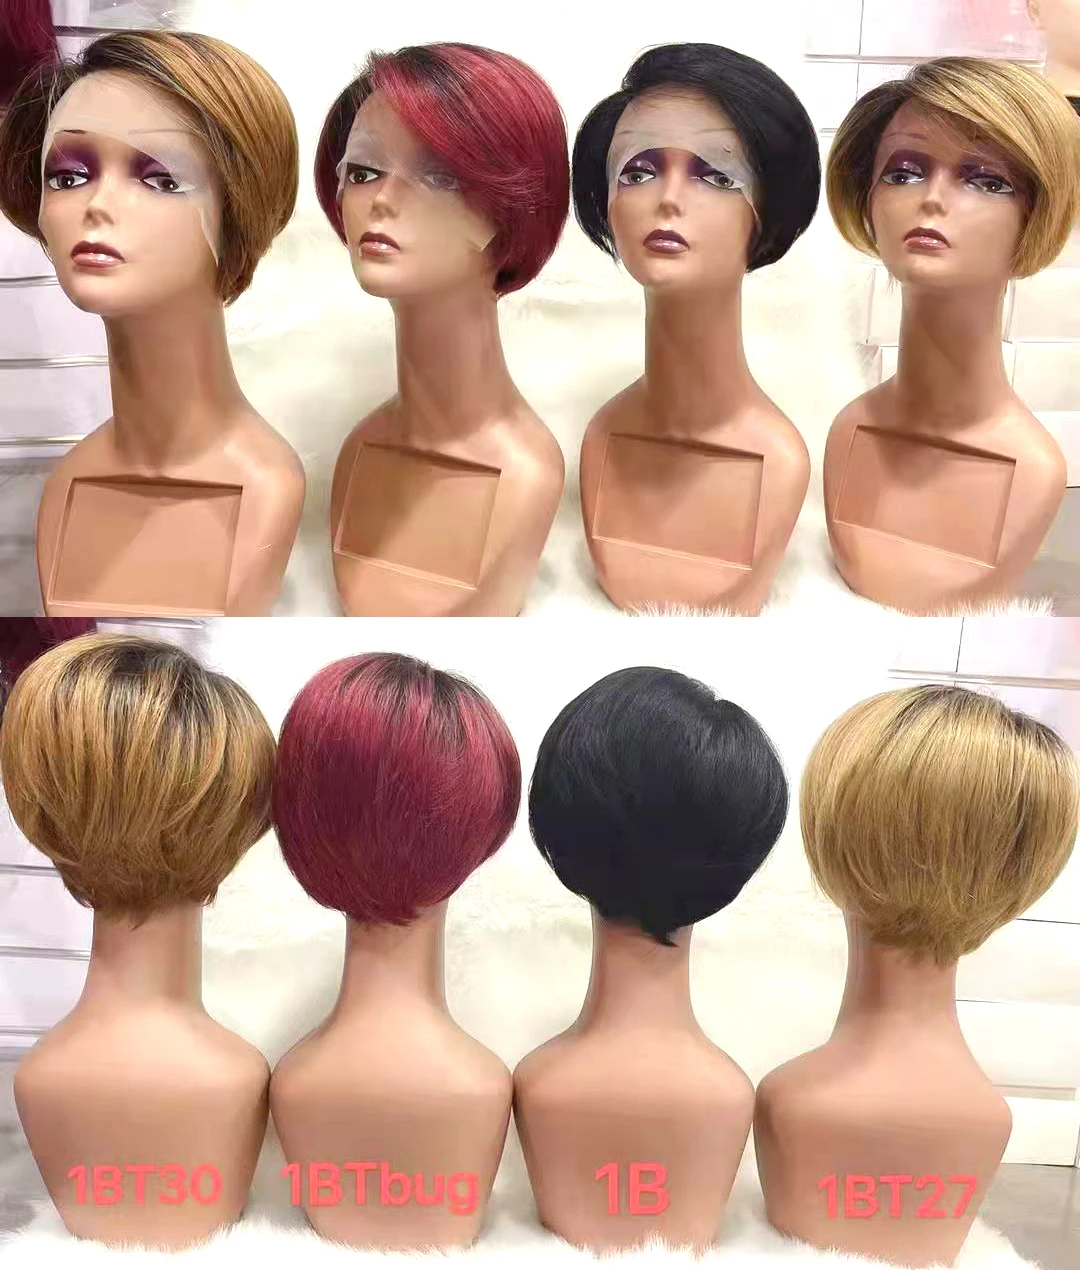 

Short Pixie Cut Straight Wig Natural Human Hair Pixie Bob Closure Wig With short Lace For Women